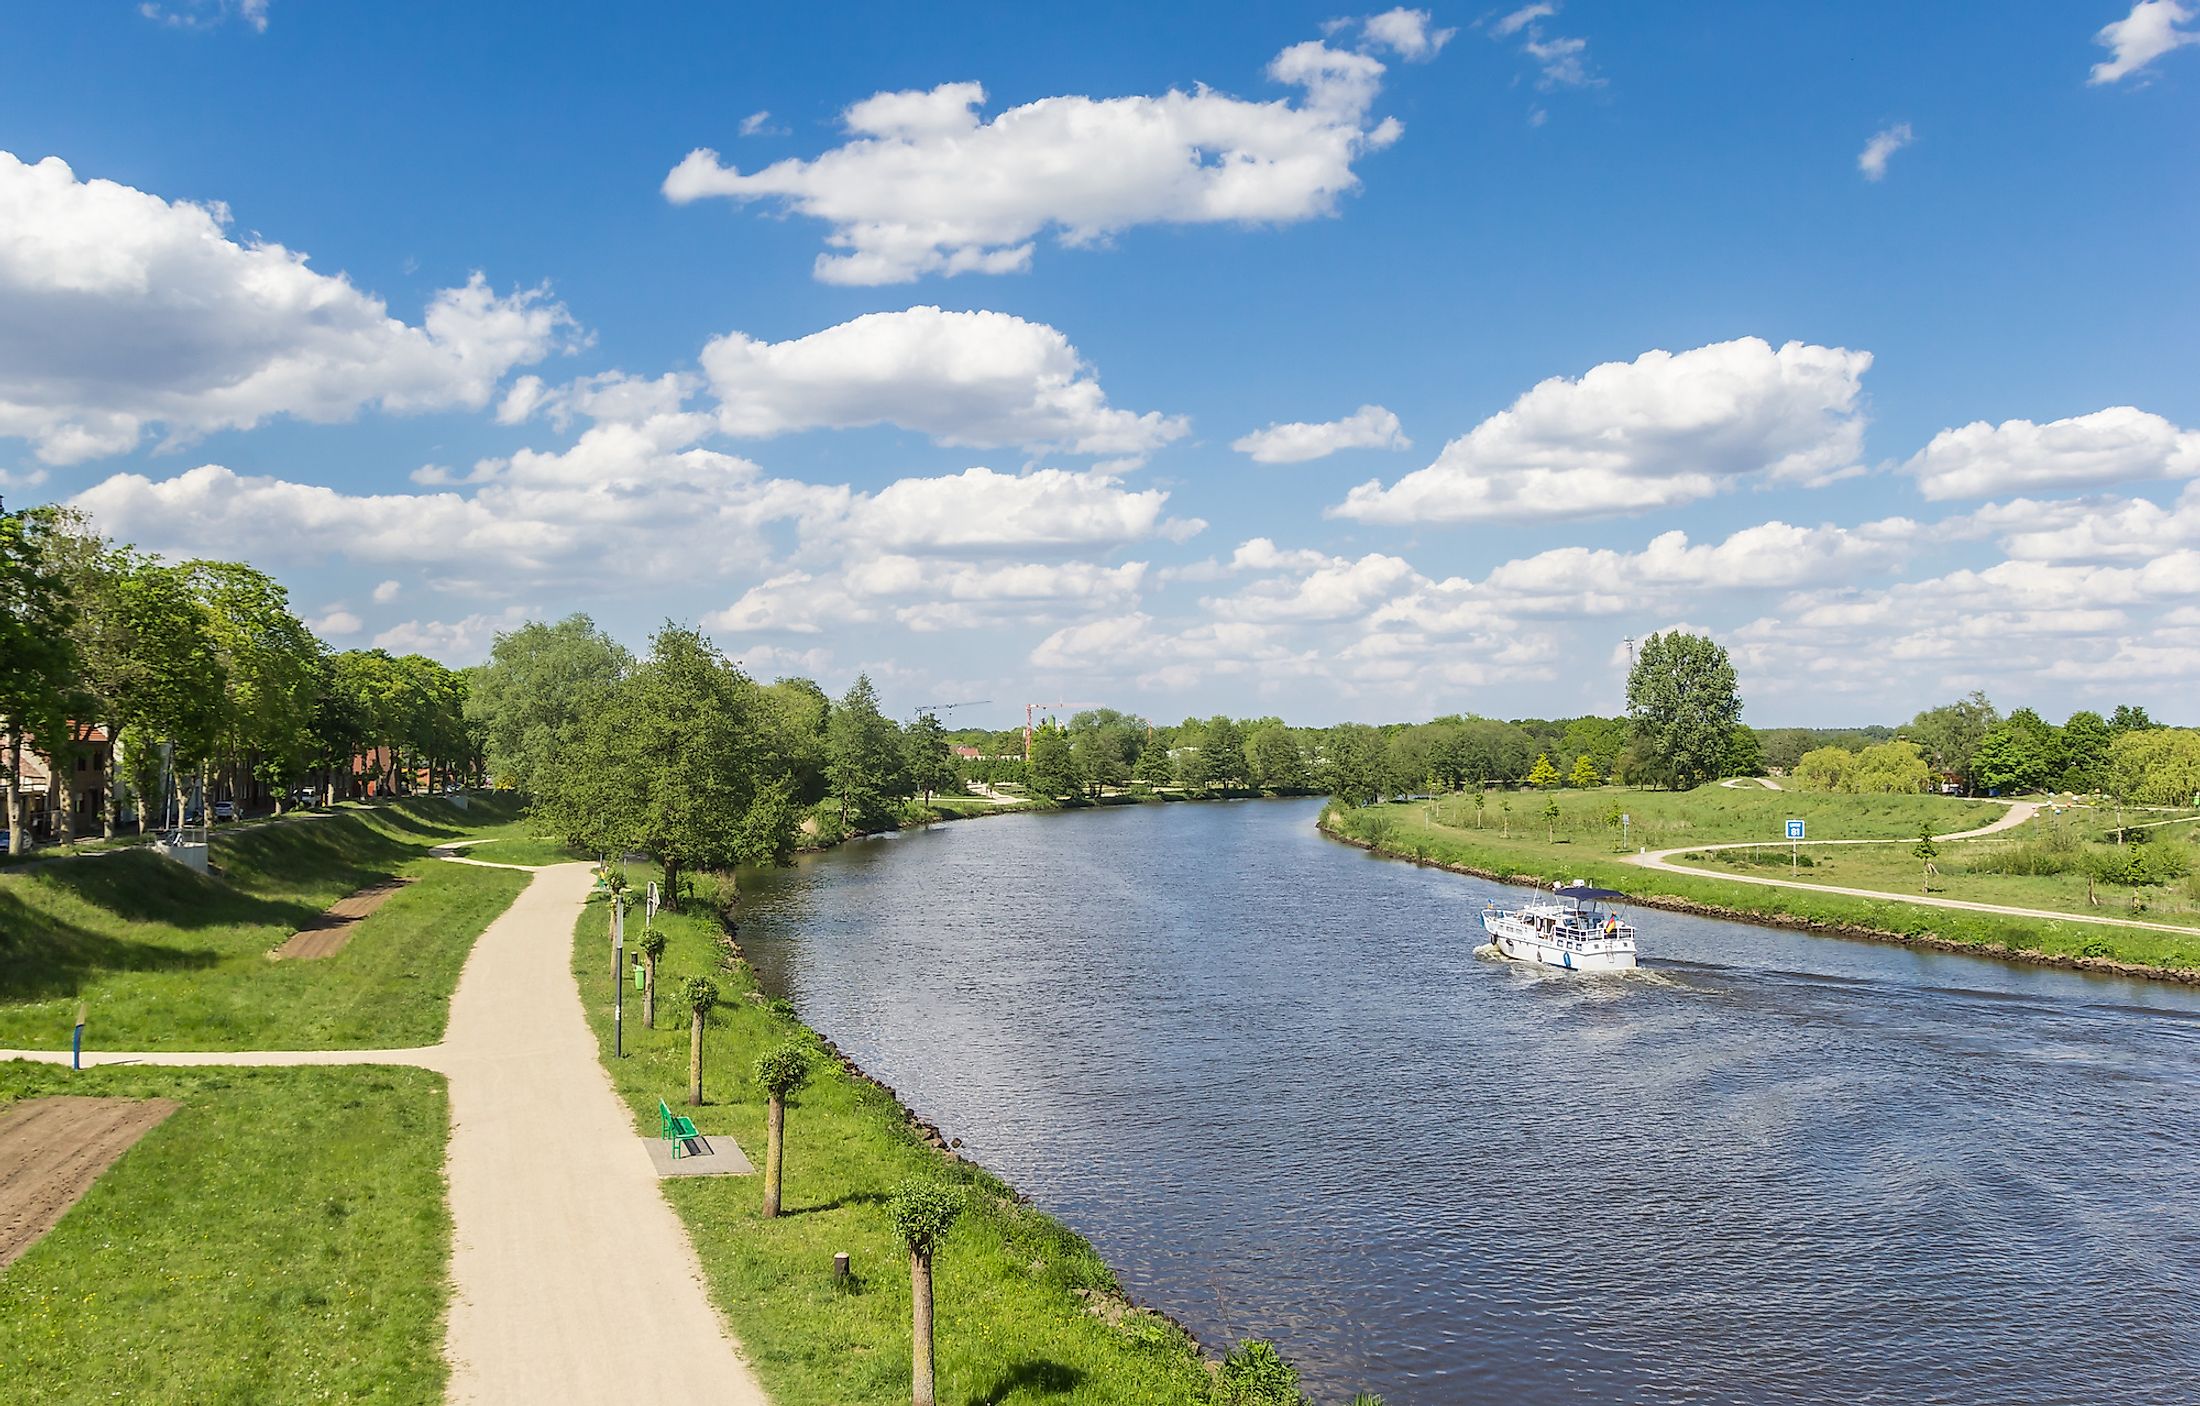 Bicycle path along the river Ems in Haren, Germany.